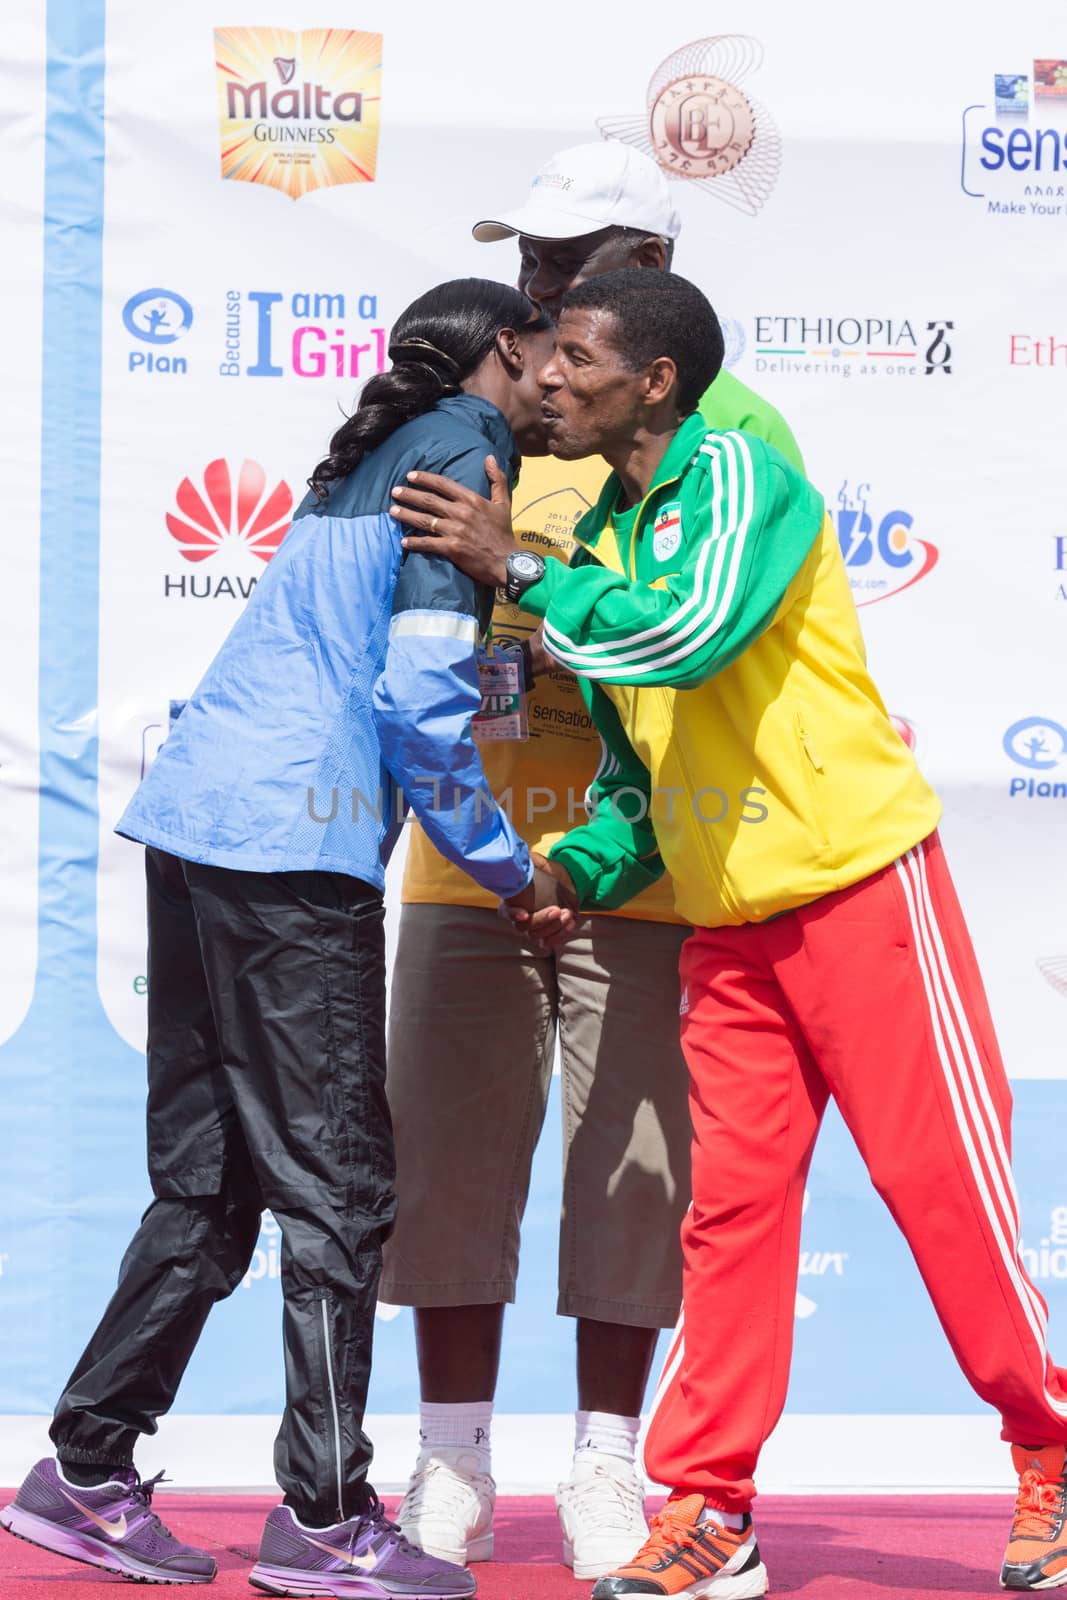 Haile Gebrselassie and Priscah Jeptoo by derejeb